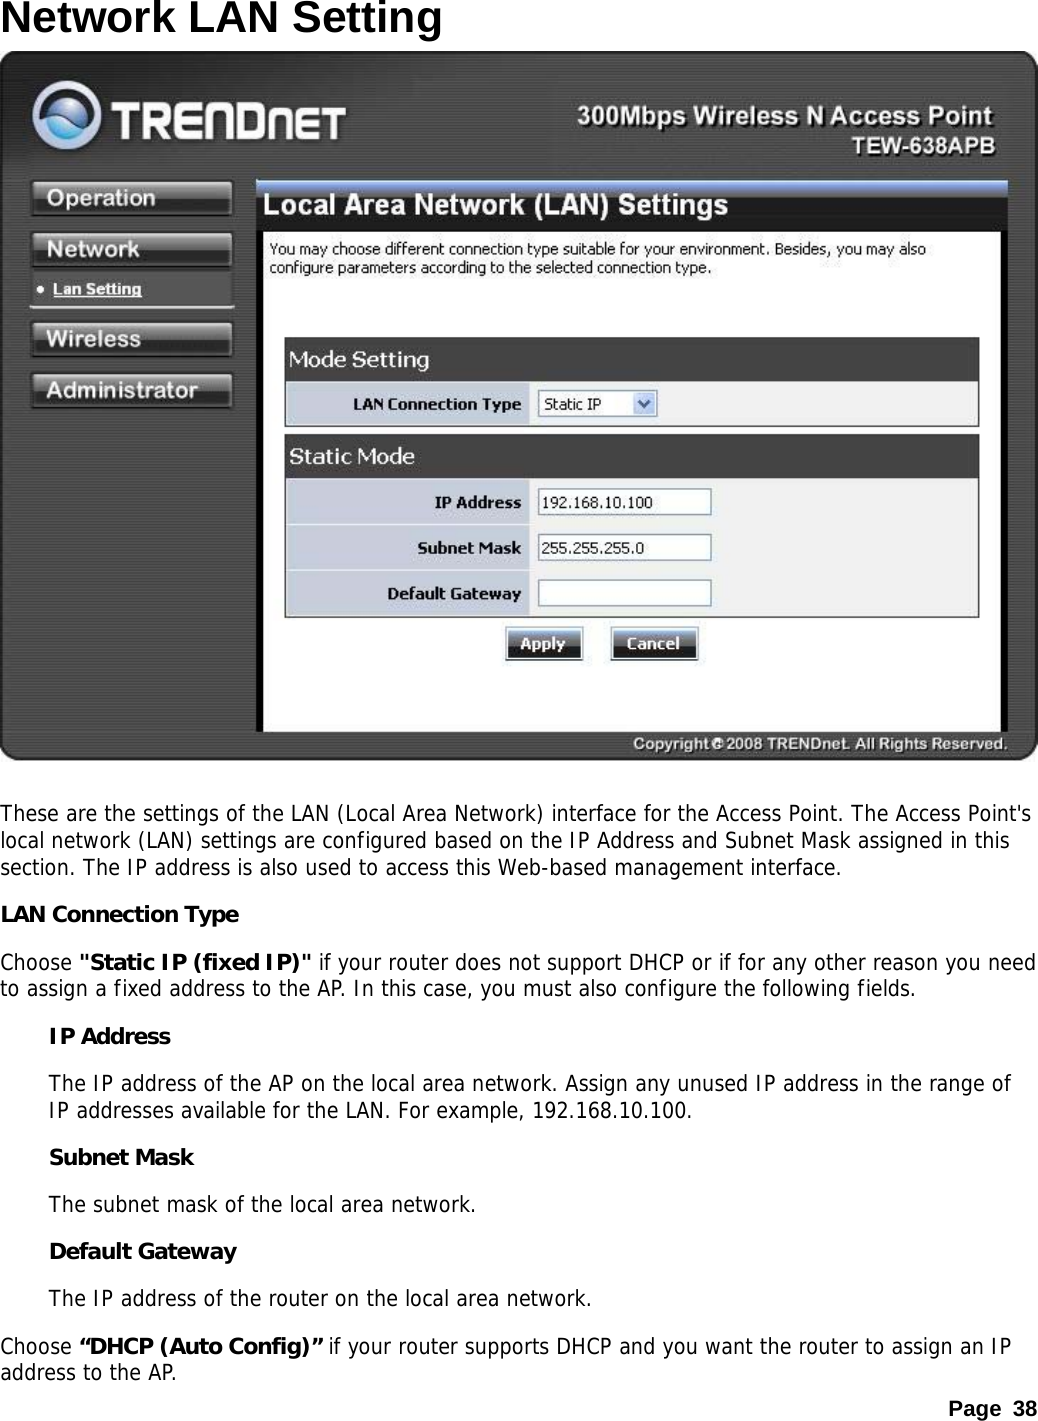 Page 38 Network LAN Setting   These are the settings of the LAN (Local Area Network) interface for the Access Point. The Access Point&apos;s local network (LAN) settings are configured based on the IP Address and Subnet Mask assigned in this section. The IP address is also used to access this Web-based management interface.  LAN Connection Type Choose &quot;Static IP (fixed IP)&quot; if your router does not support DHCP or if for any other reason you need to assign a fixed address to the AP. In this case, you must also configure the following fields.  IP Address   The IP address of the AP on the local area network. Assign any unused IP address in the range of IP addresses available for the LAN. For example, 192.168.10.100.  Subnet Mask   The subnet mask of the local area network.  Default Gateway   The IP address of the router on the local area network.  Choose “DHCP (Auto Config)” if your router supports DHCP and you want the router to assign an IP address to the AP. 